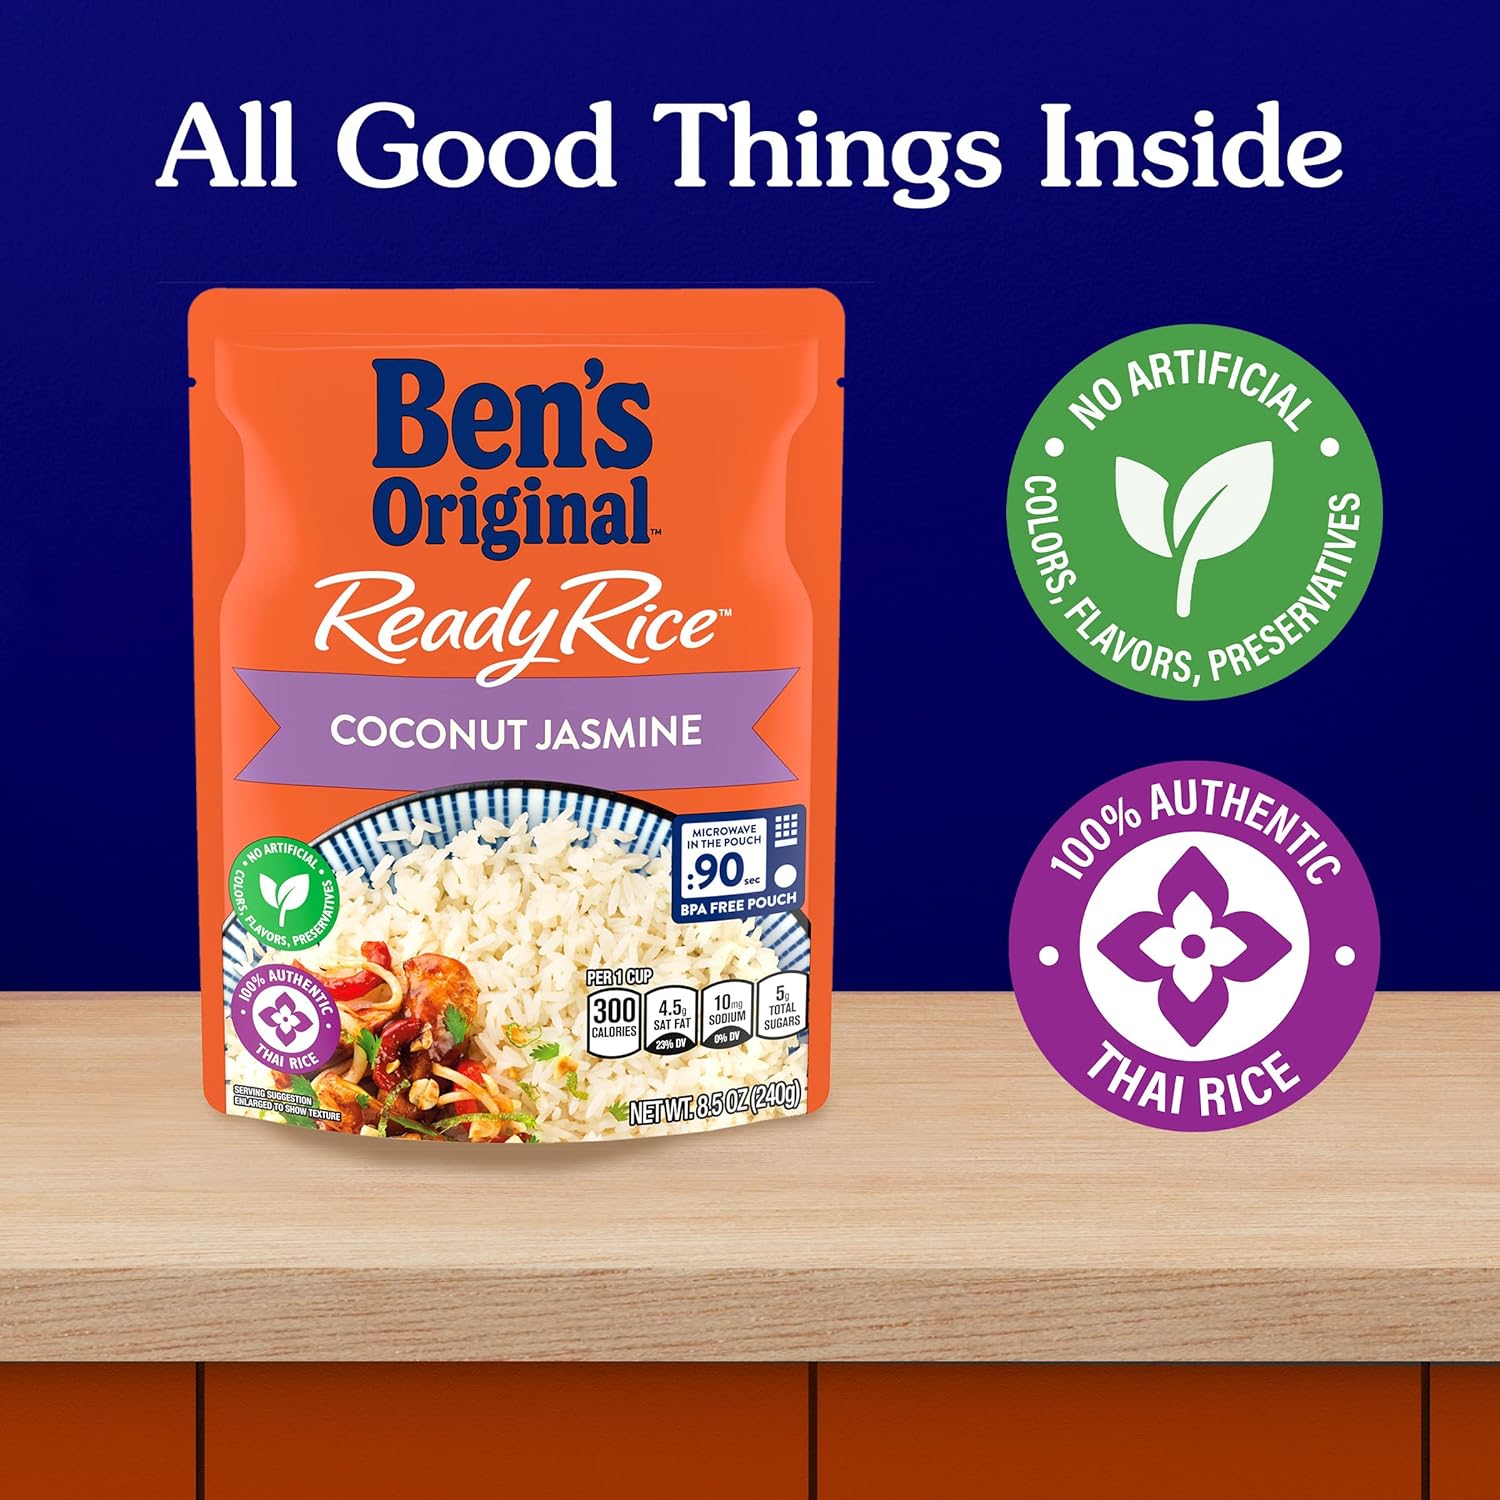 BEN'S ORIGINAL Ready Rice Coconut Jasmine Flavored Rice, Easy Dinner Side, 8.5 OZ Pouch (Pack of 12) : Everything Else